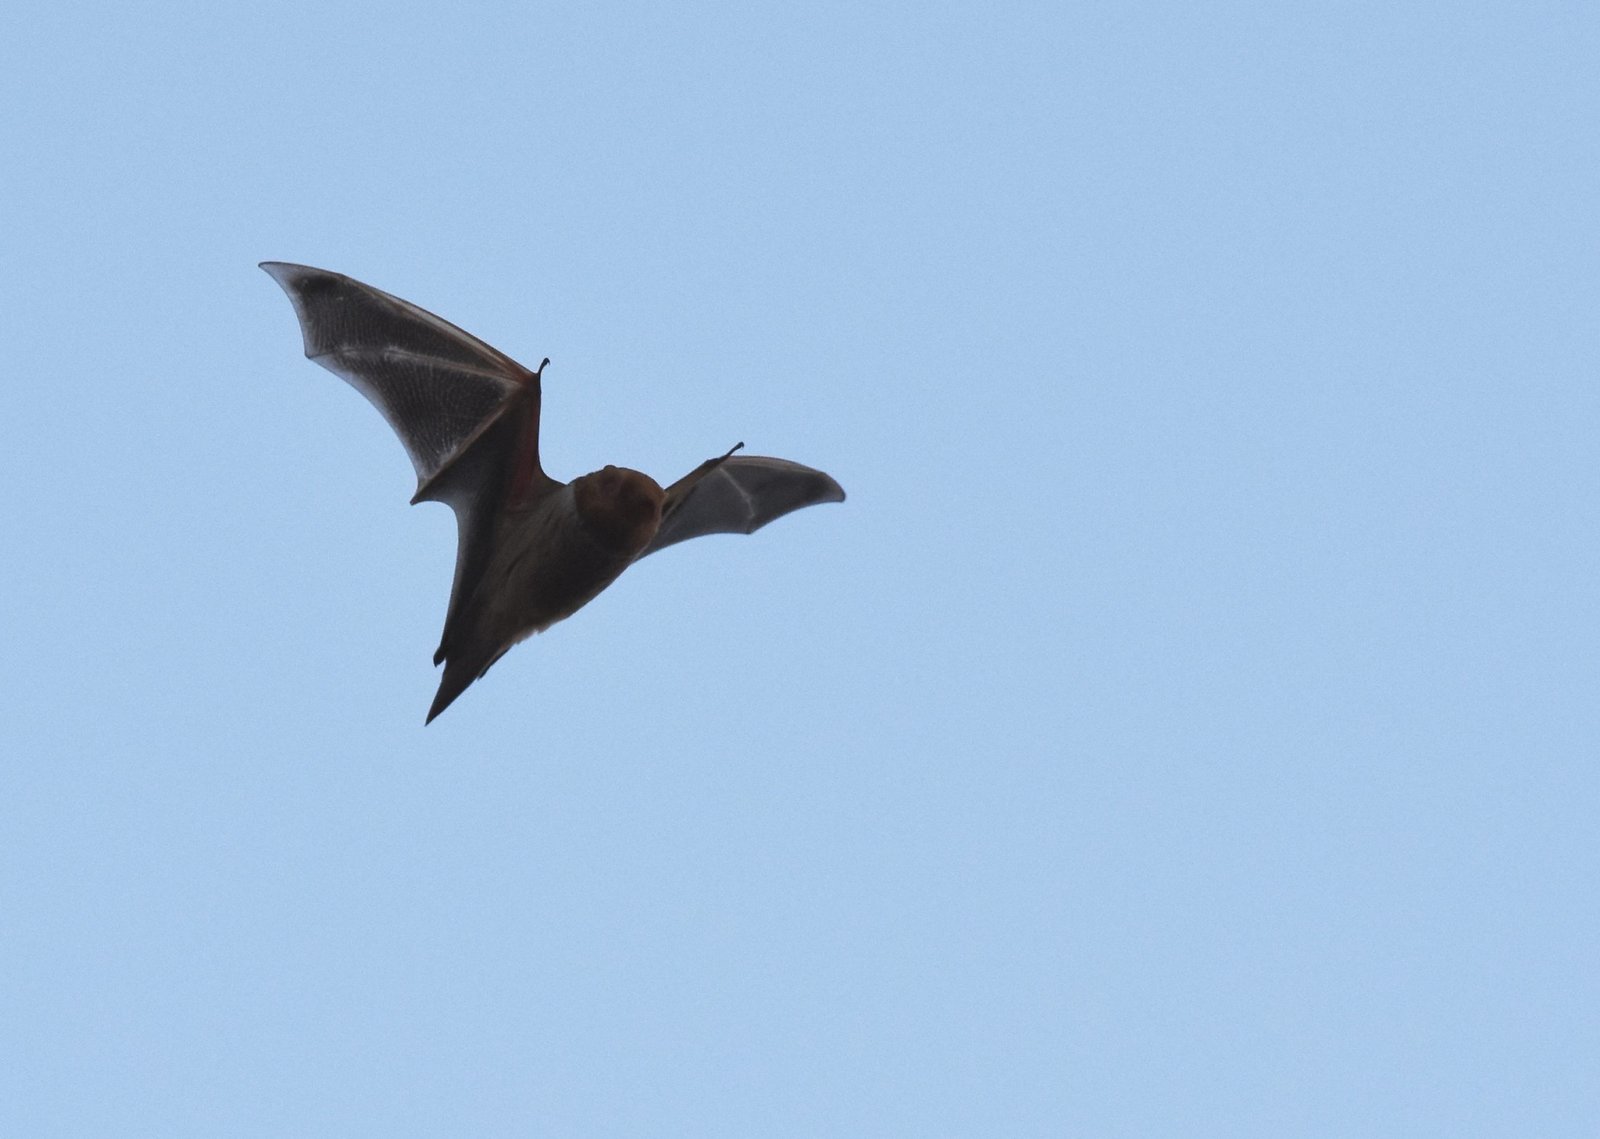 Image of an eastern red bat in flight